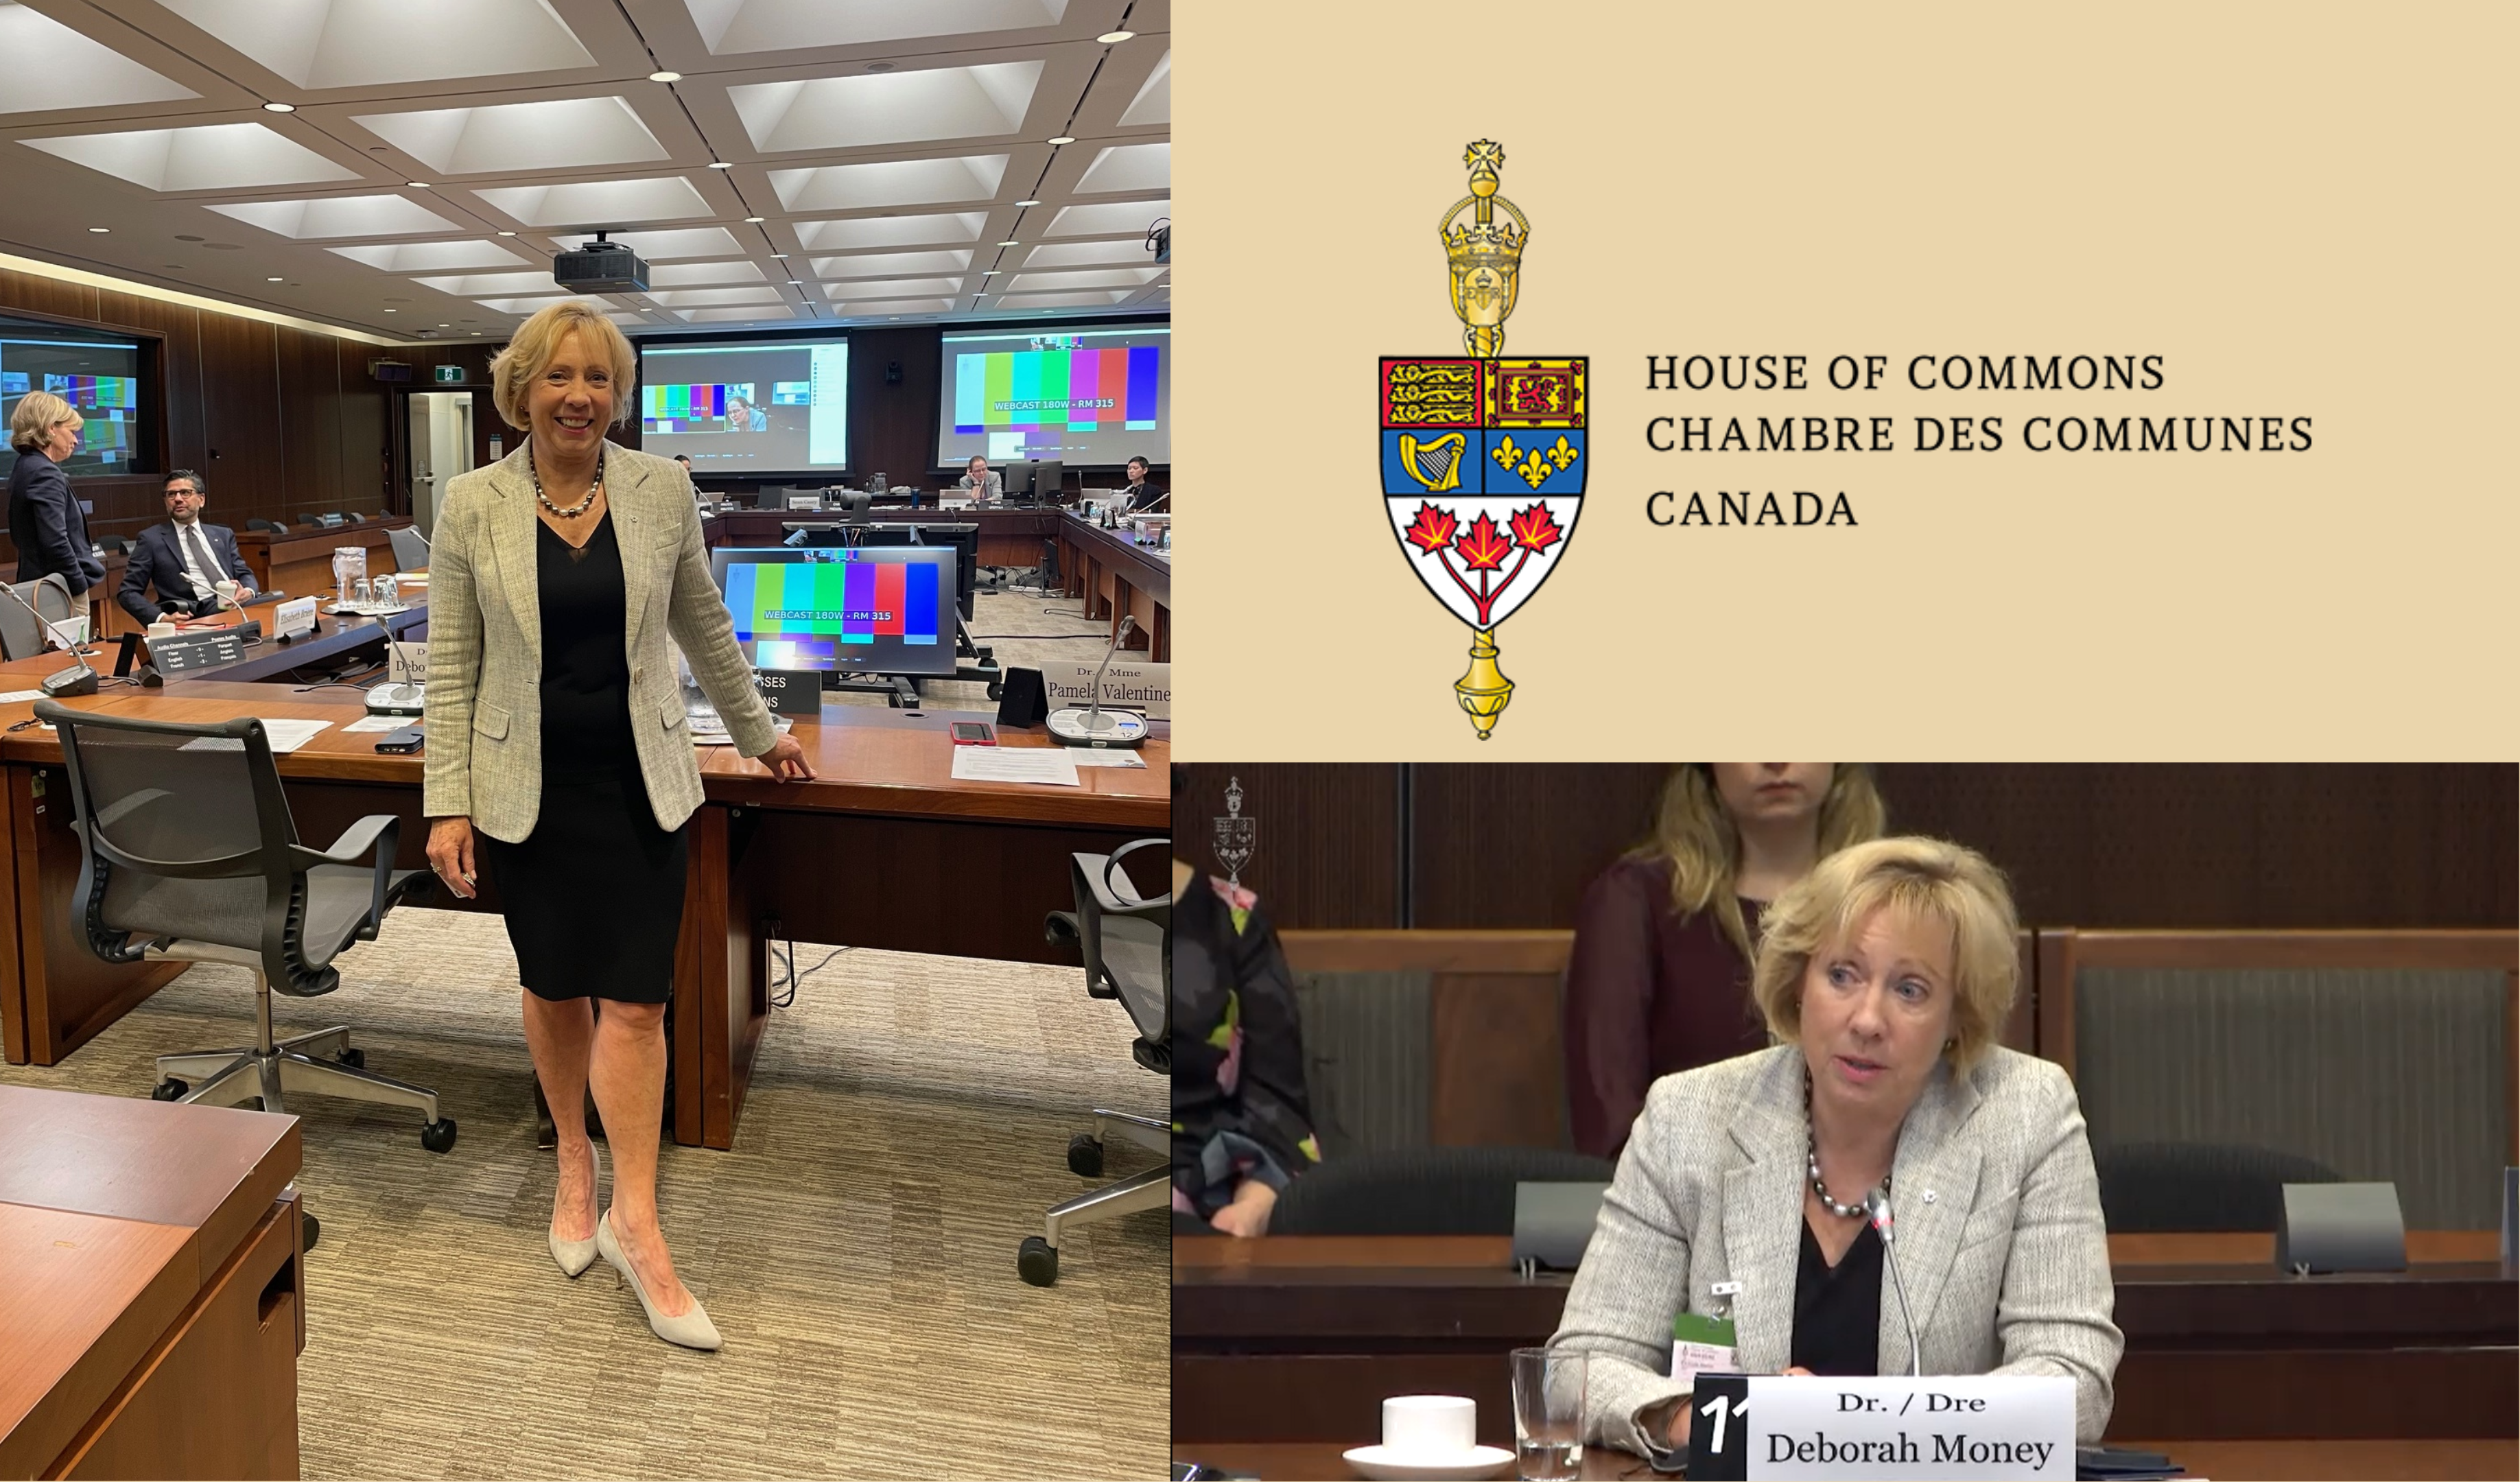 Dr. Deborah Money Presented and Participated in a Q&A Session during Women’s Health-Focused Meeting of the Canadian House of Commons Standing Committee on Health!